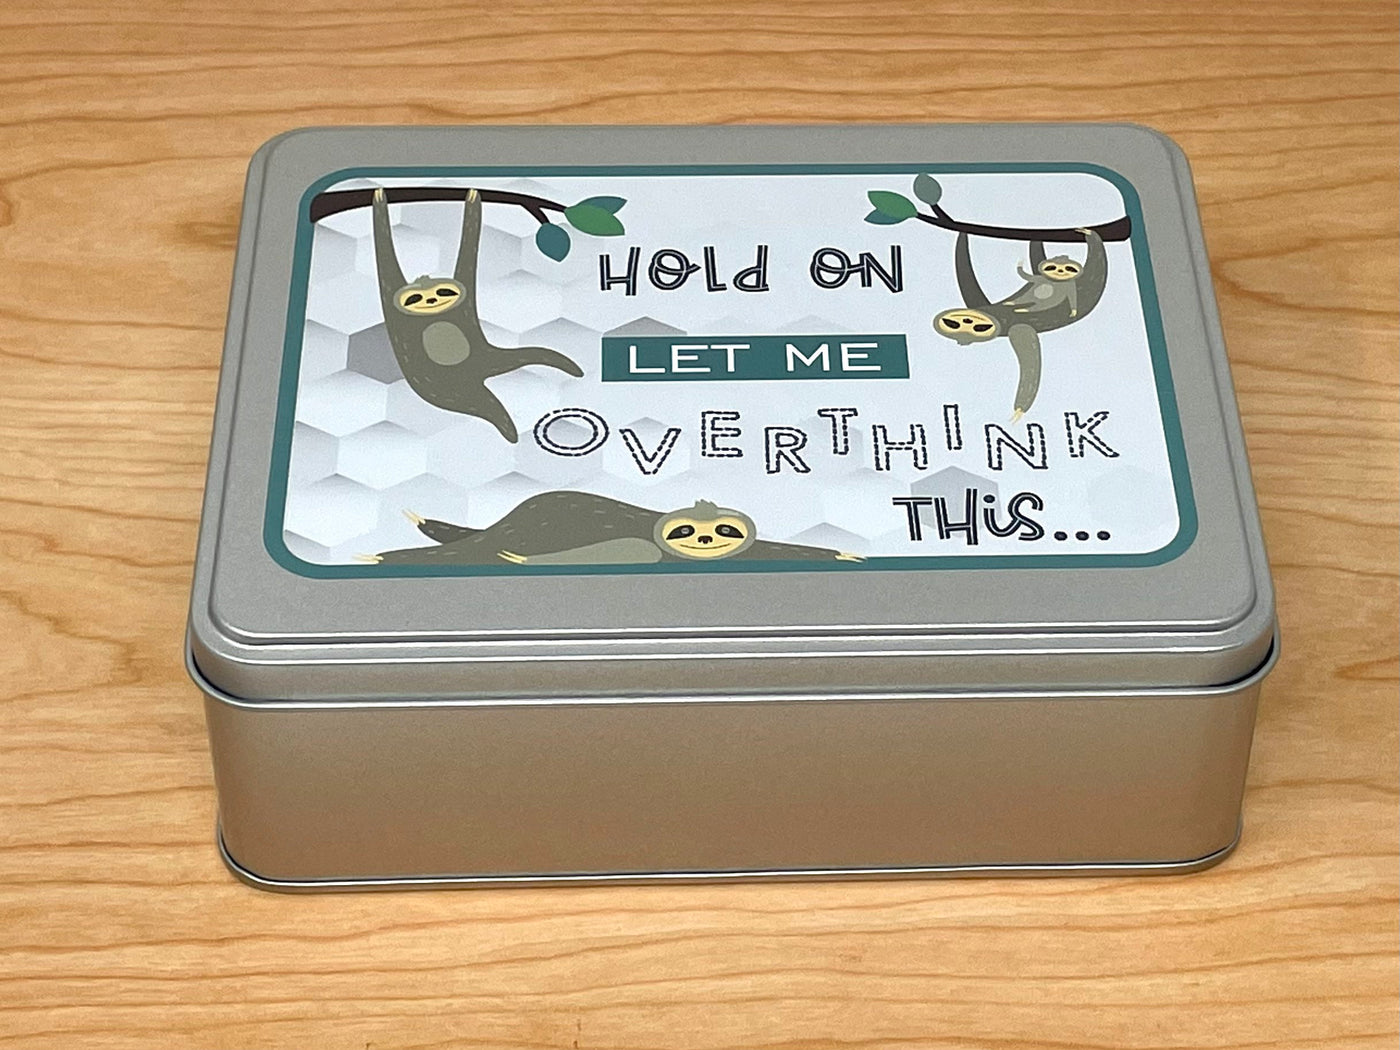 Sloth WIP bobbin storage tin with foam insert to hold 30 bobbins for cross stitch / embroidery projects